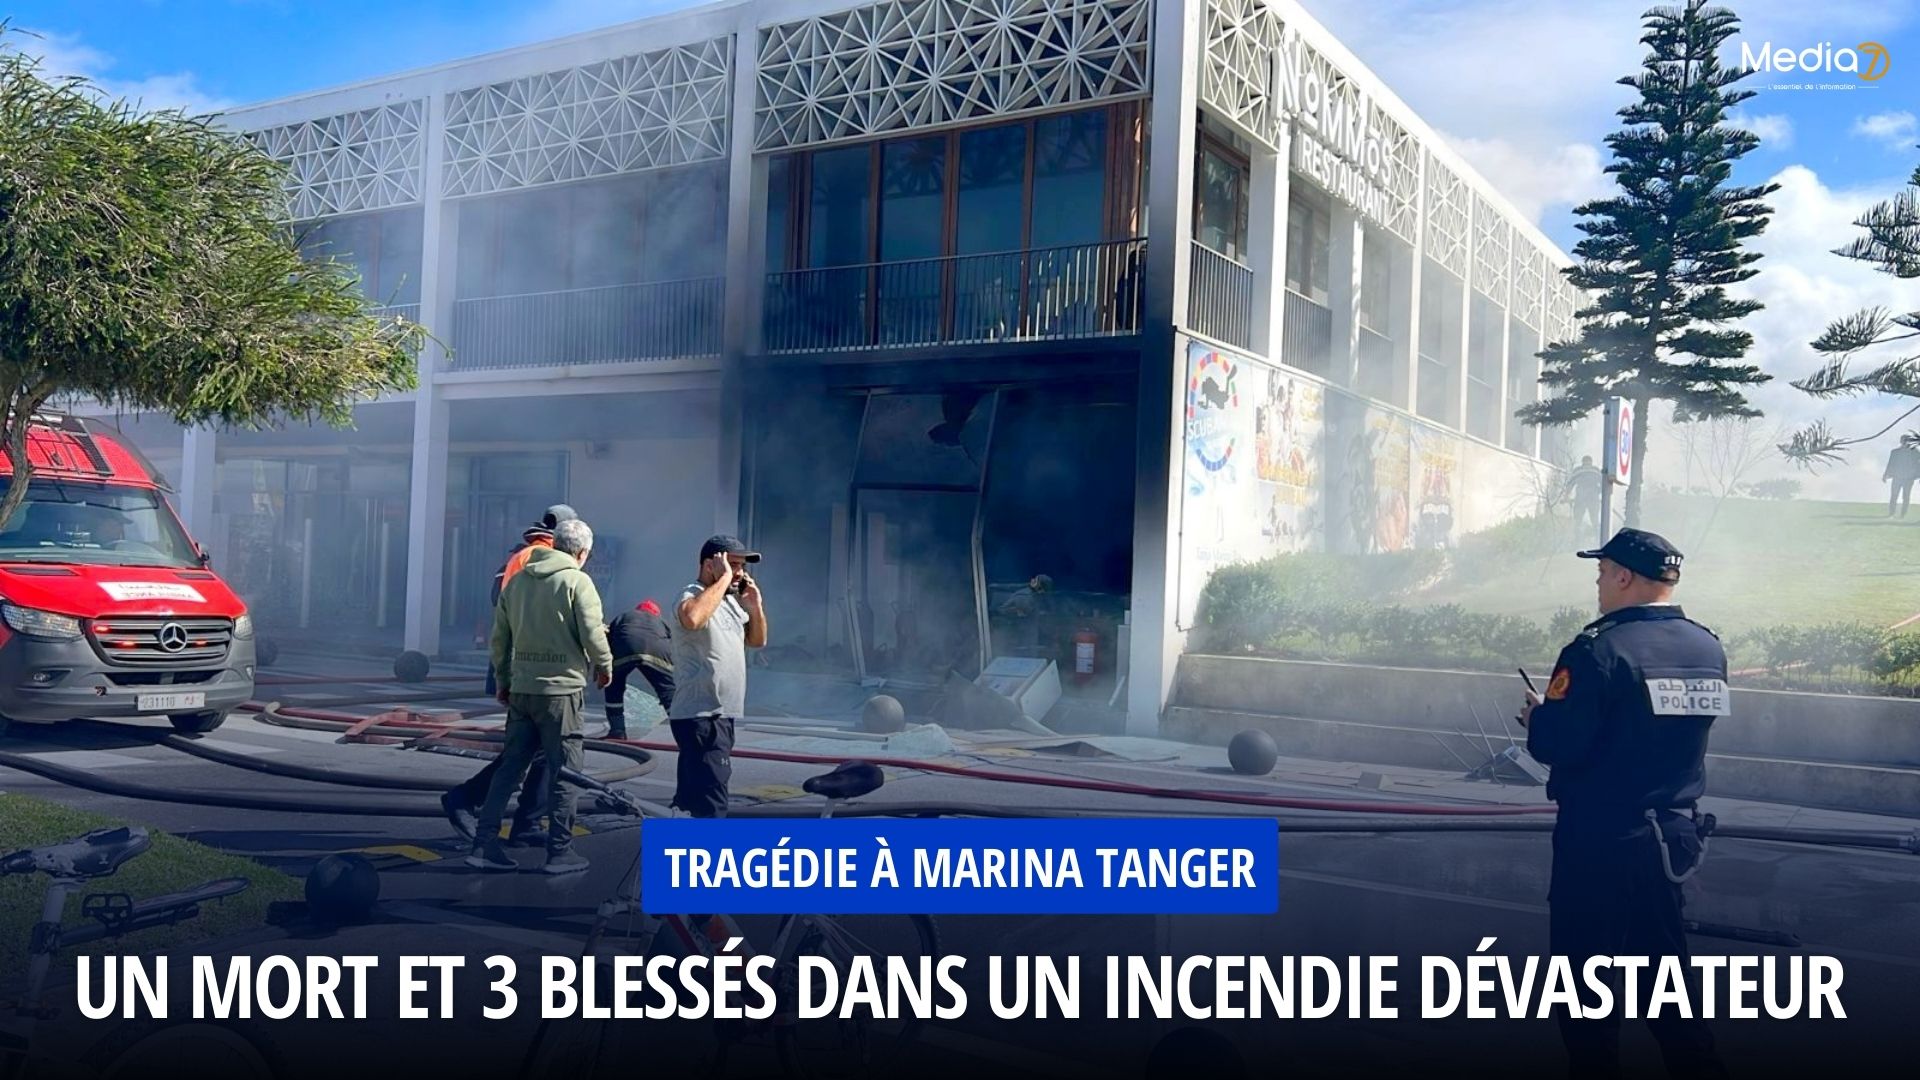 Tragedy in Marina Tangier: One Dead and 3 Injured in a Devastating Fire